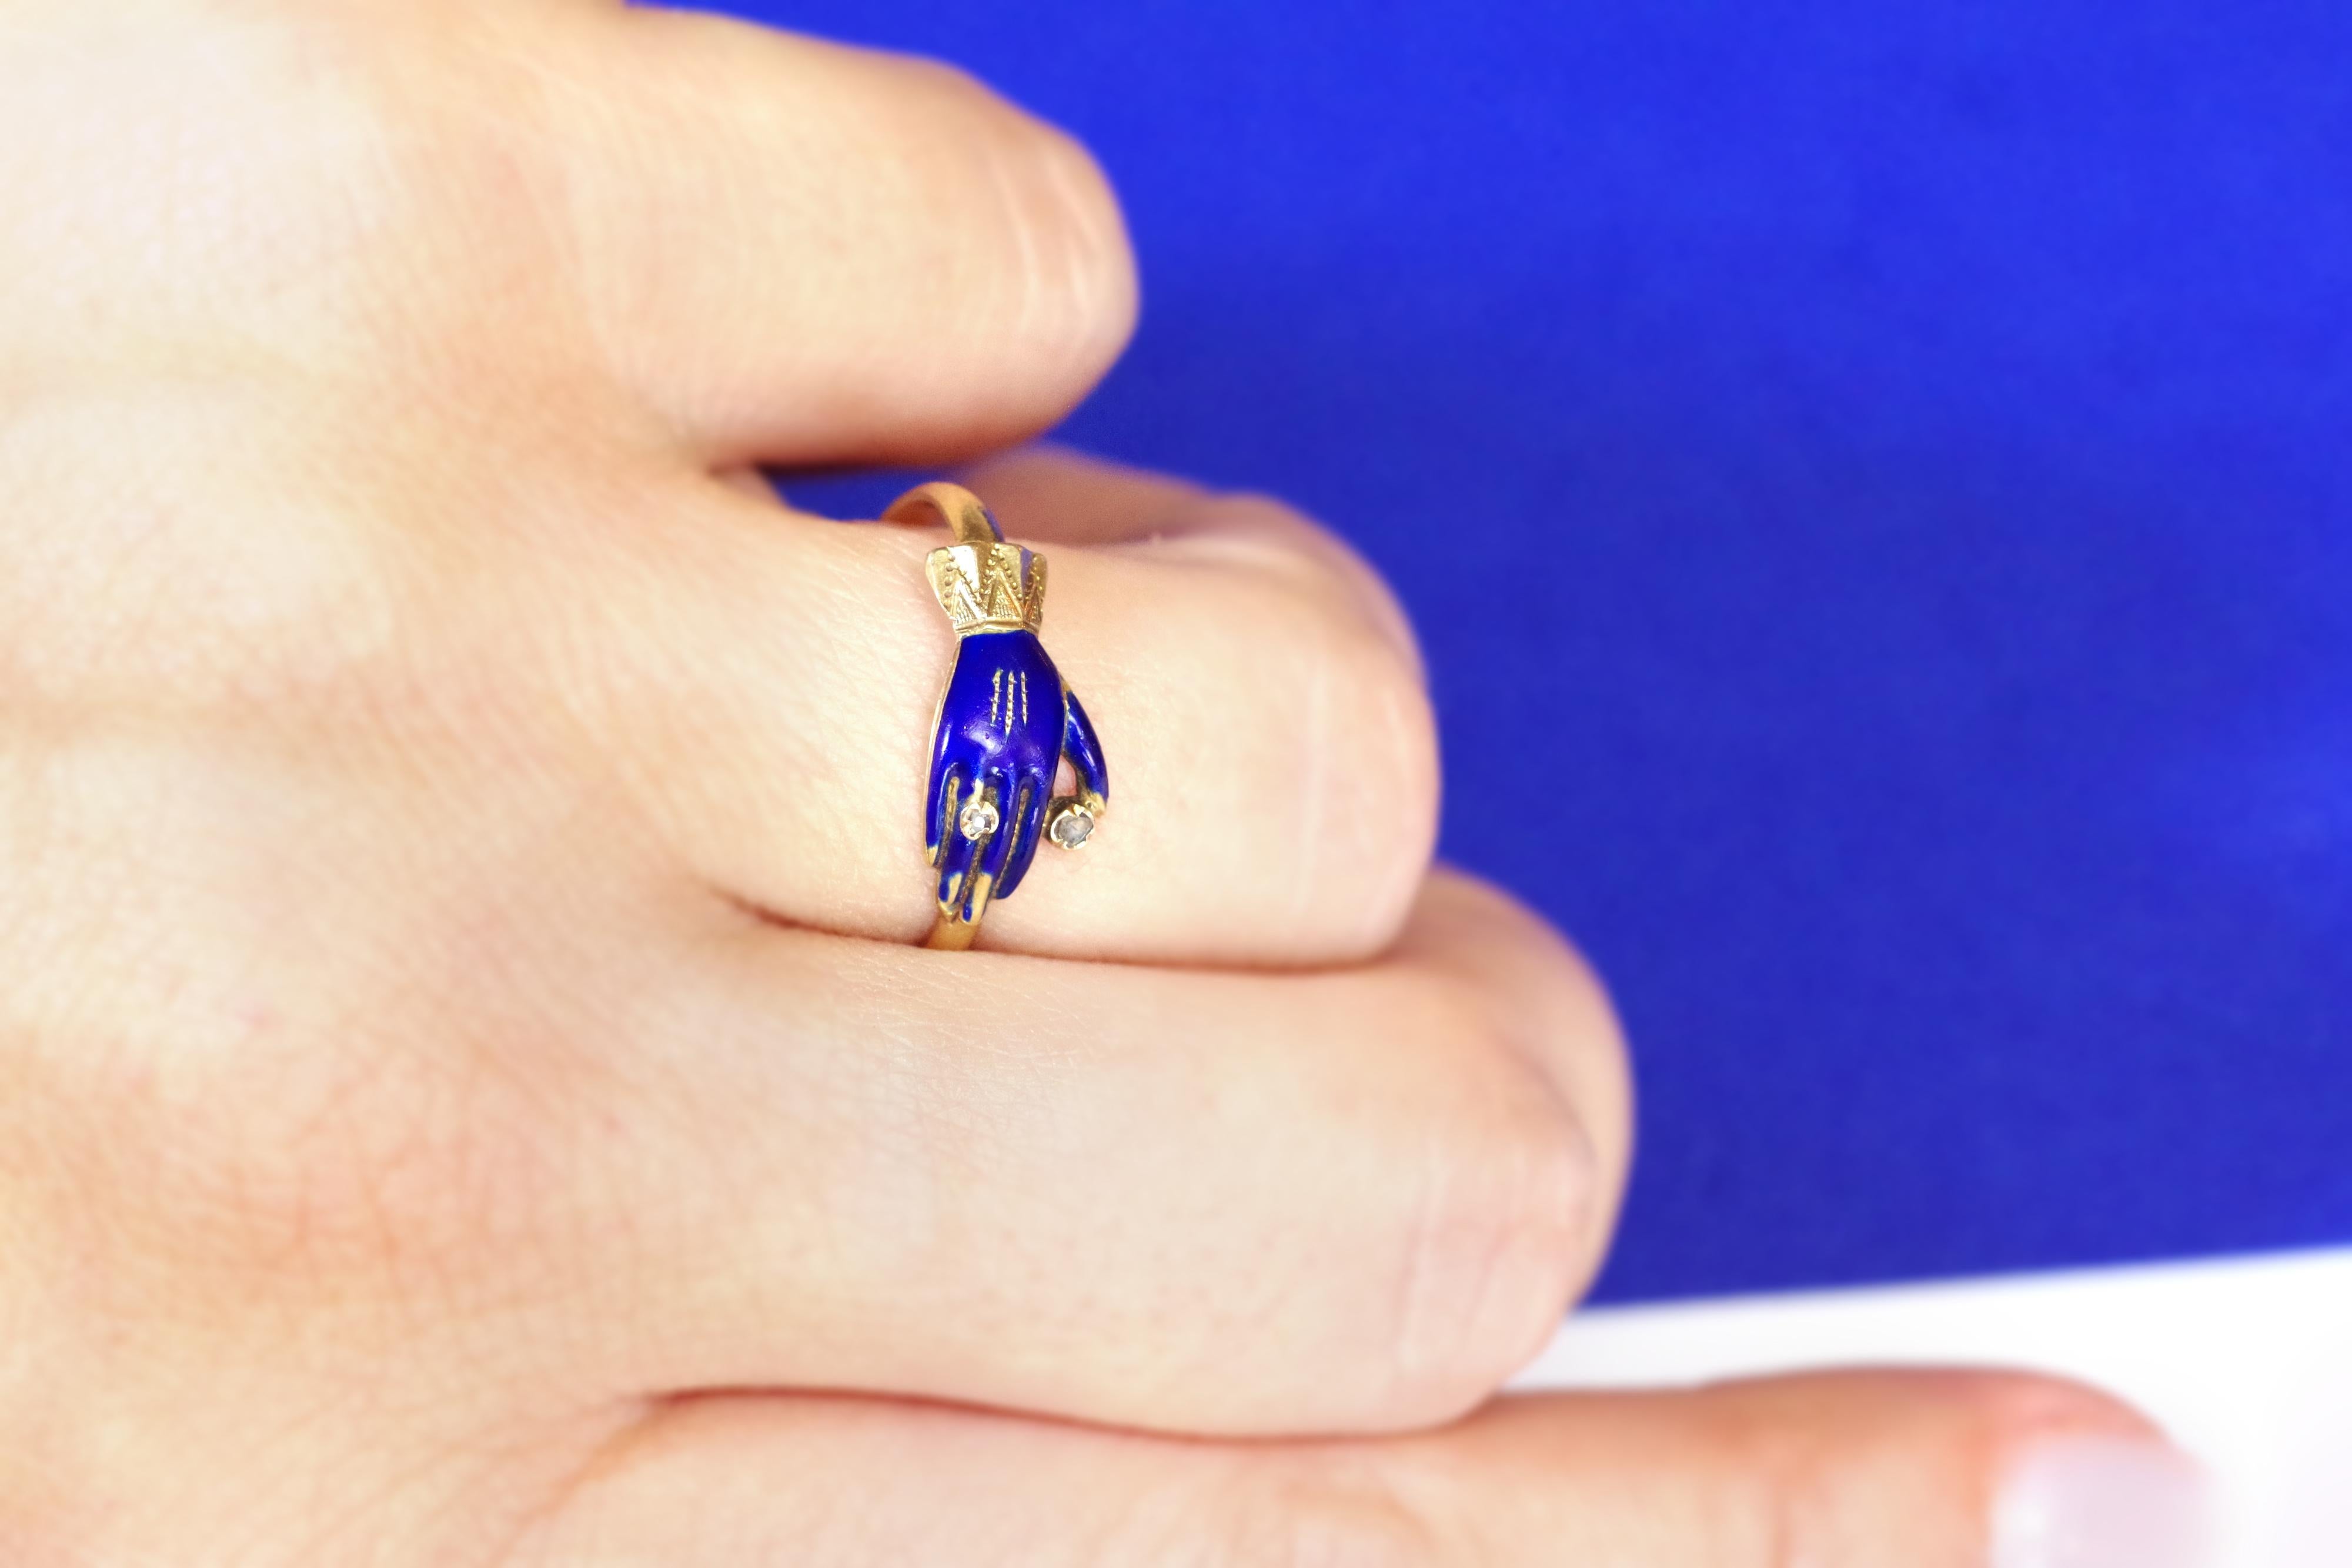 Victorian ring hand enamel diamond in yellow gold 18 karats. Antique promise ring representing a gloved hand wearing a ring and holding a rose-cut diamond. The glove is enamelled dark blue color, the sleeve is in gold chiselled with patterns. The